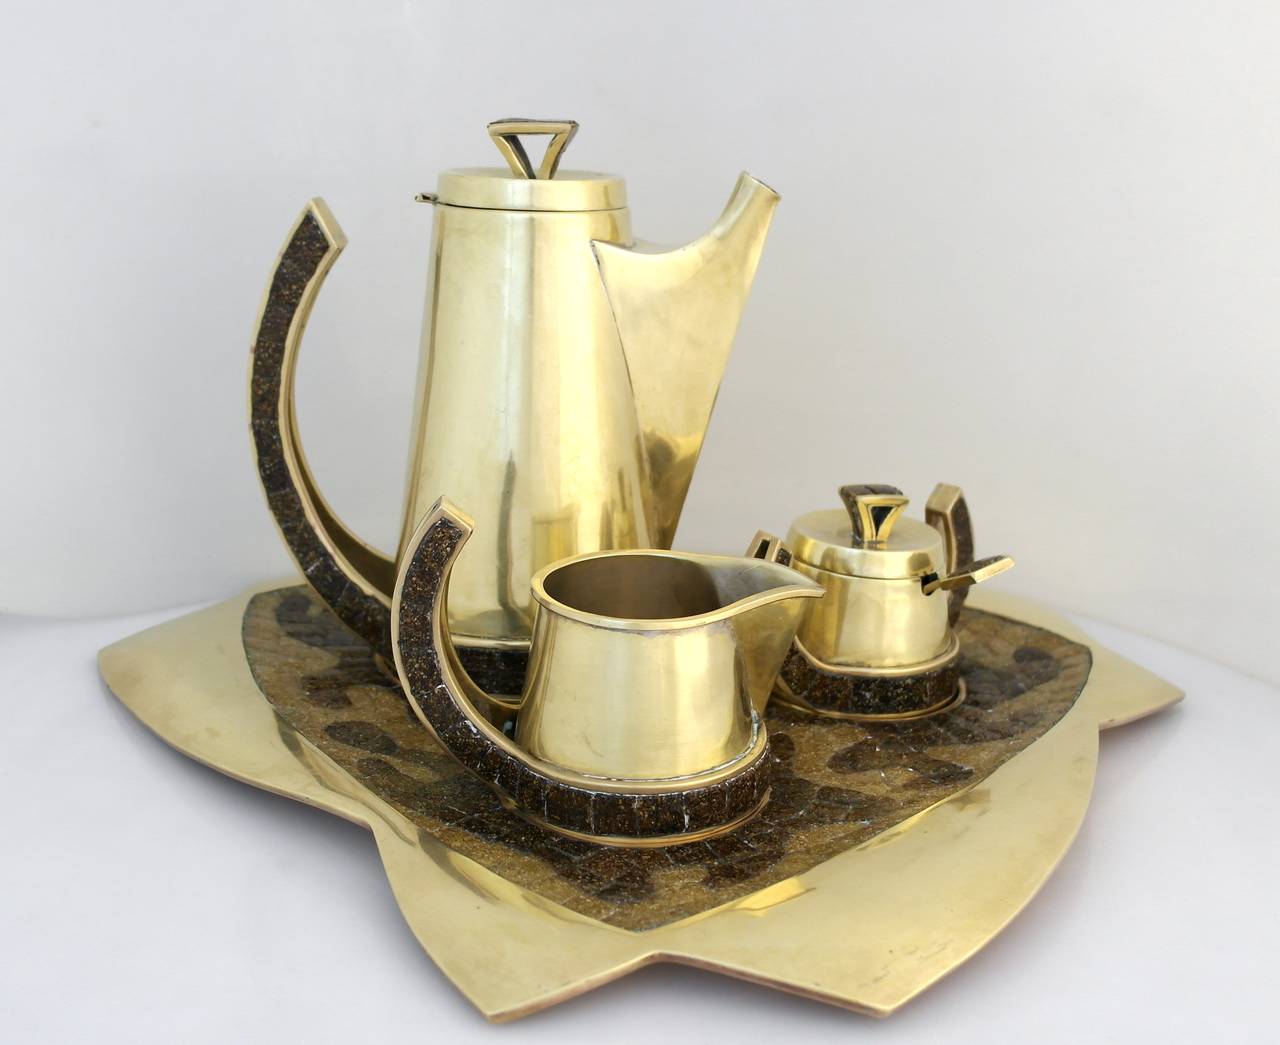 Being offered is a tea set, circa 1970s by Salvador Teran of Taxco, Mexico, hand-wrought brass and glass mosaic tile coffee service includes coffee server, sugar bowl with lid and spoon, creamer and tray. Marked. In excellent condition.
Dimensions: